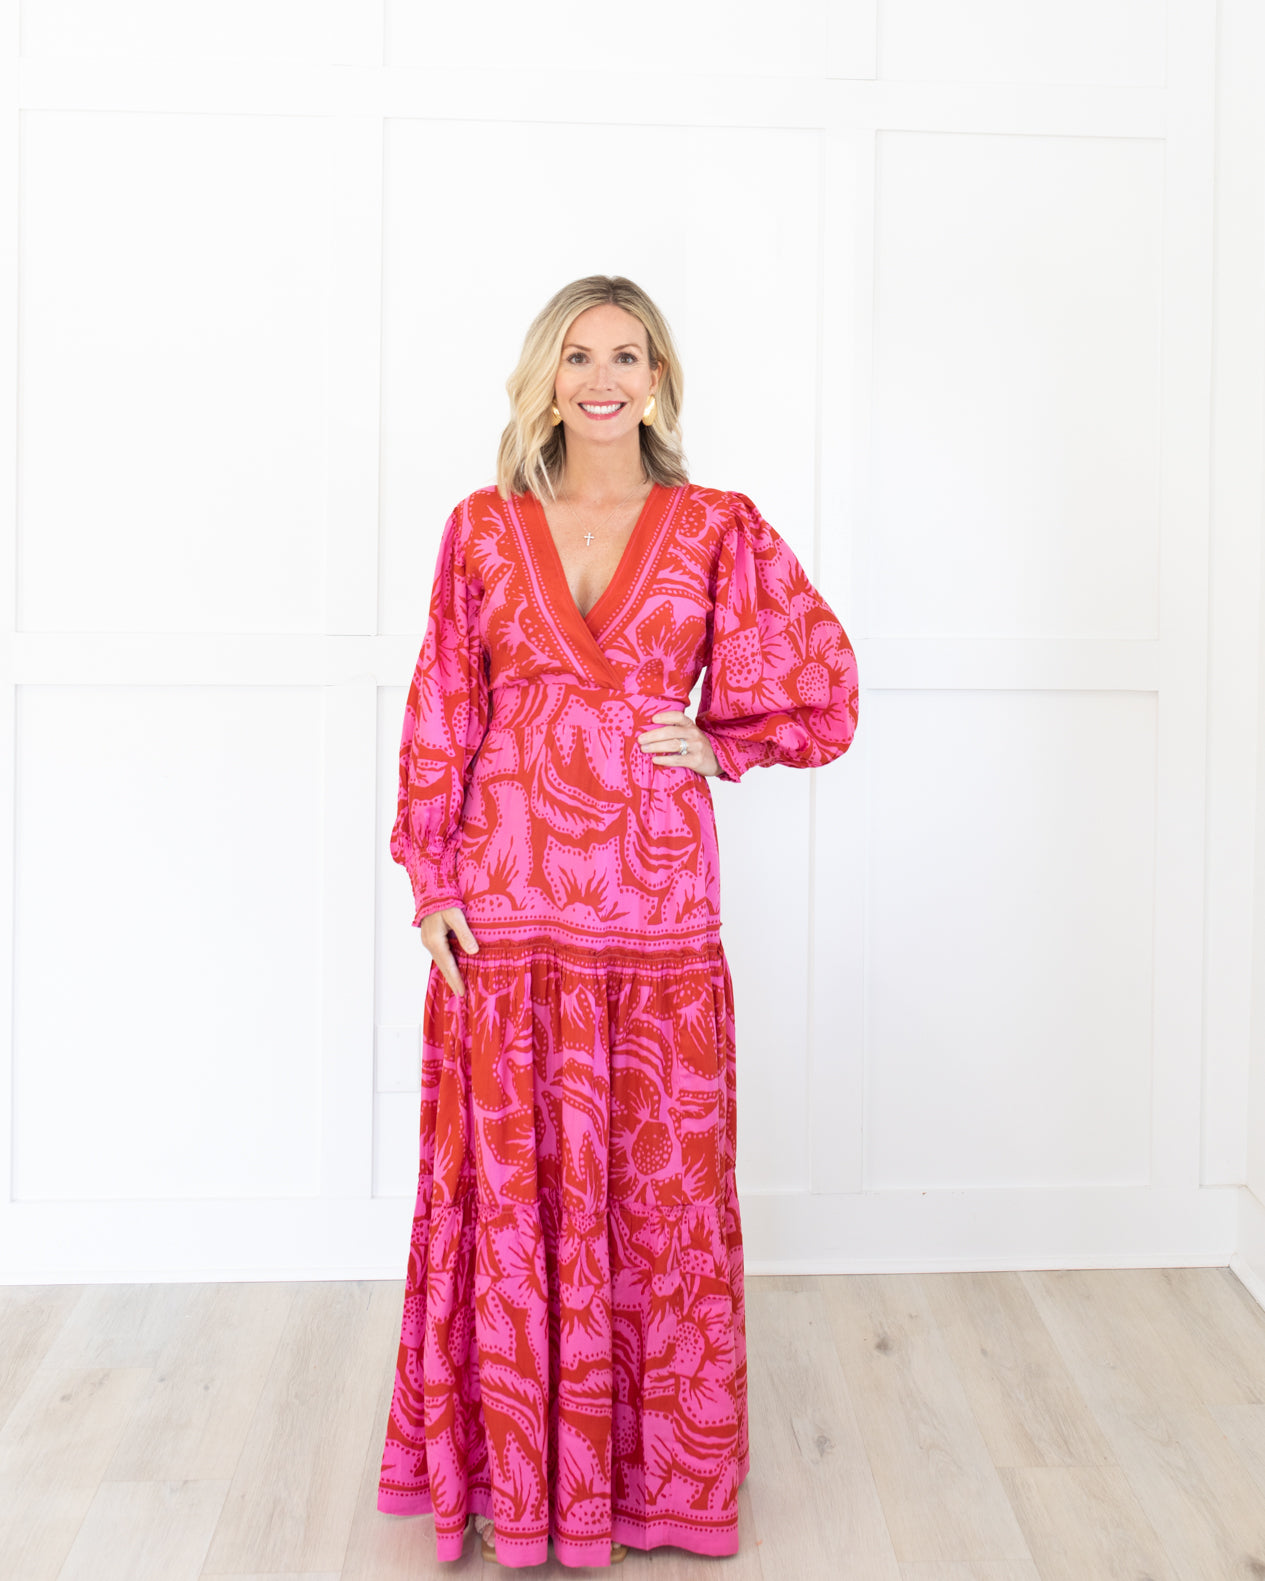 Pink and Red V-Front Maxi